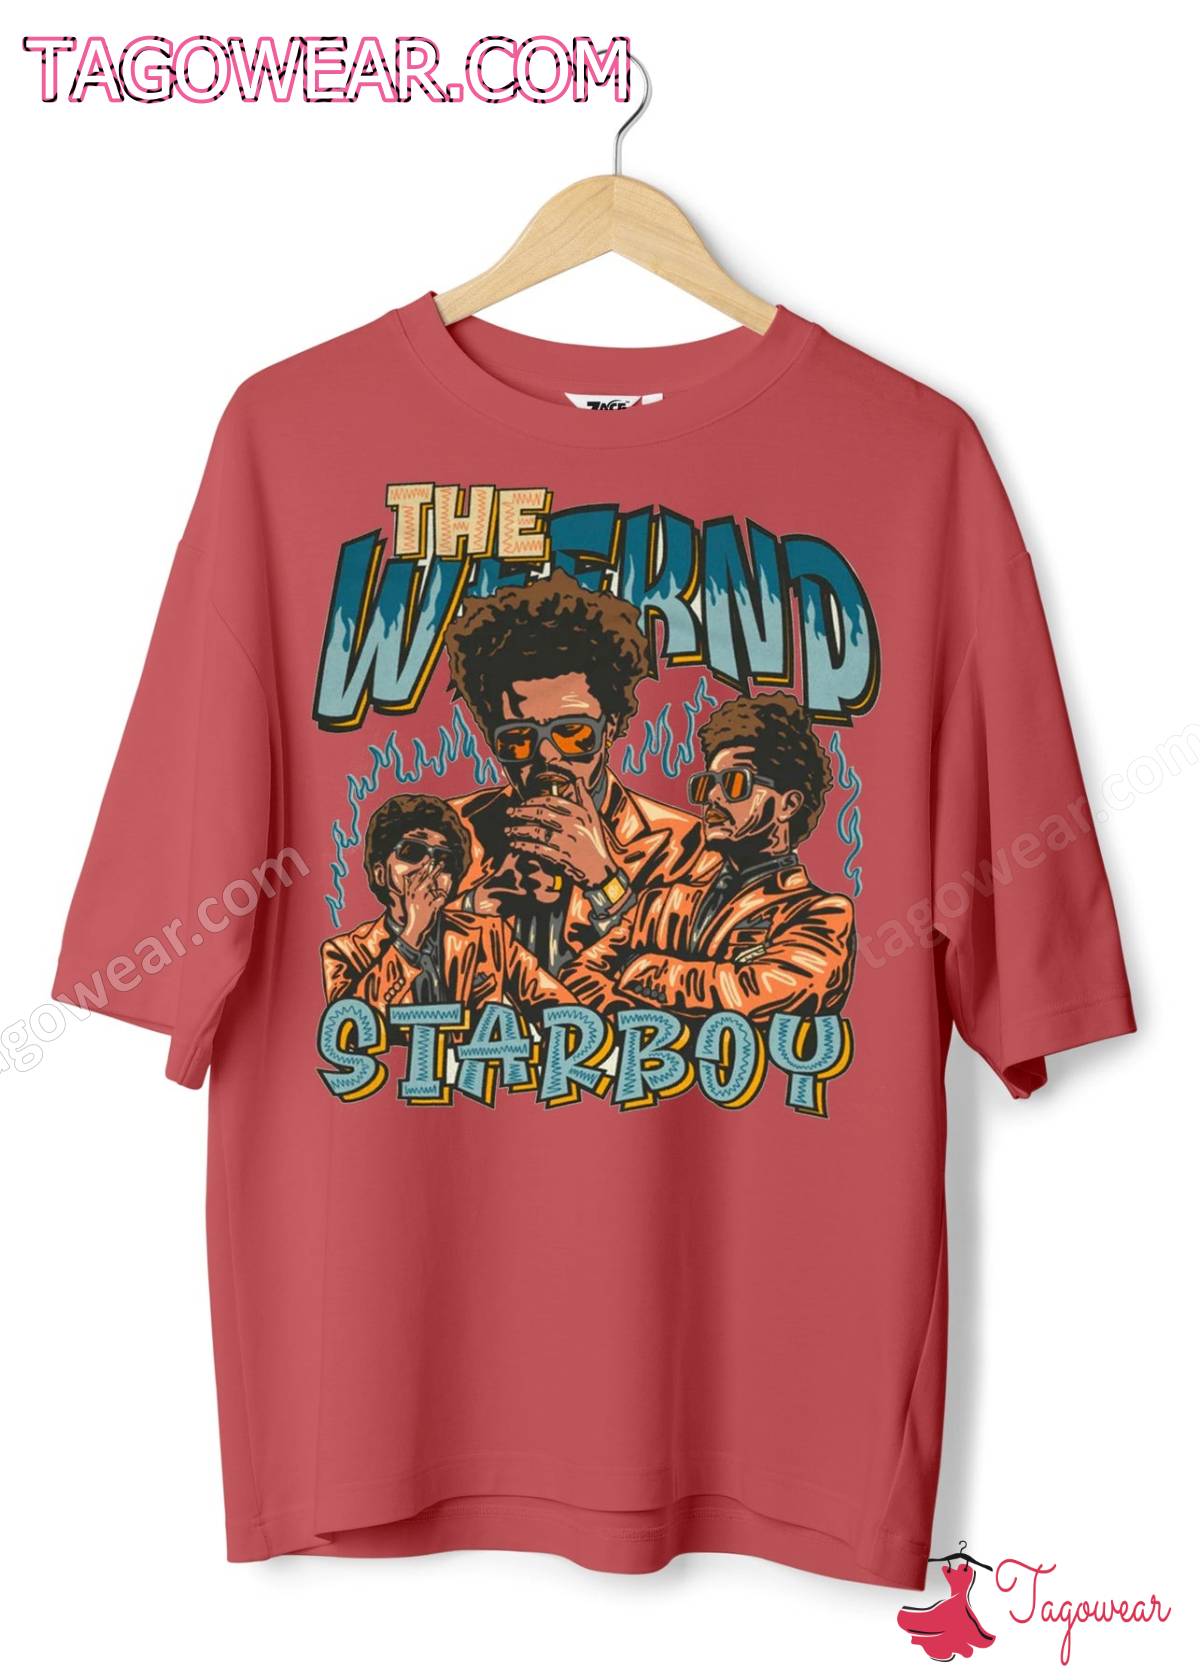 The Weeknd Starboy Shirt